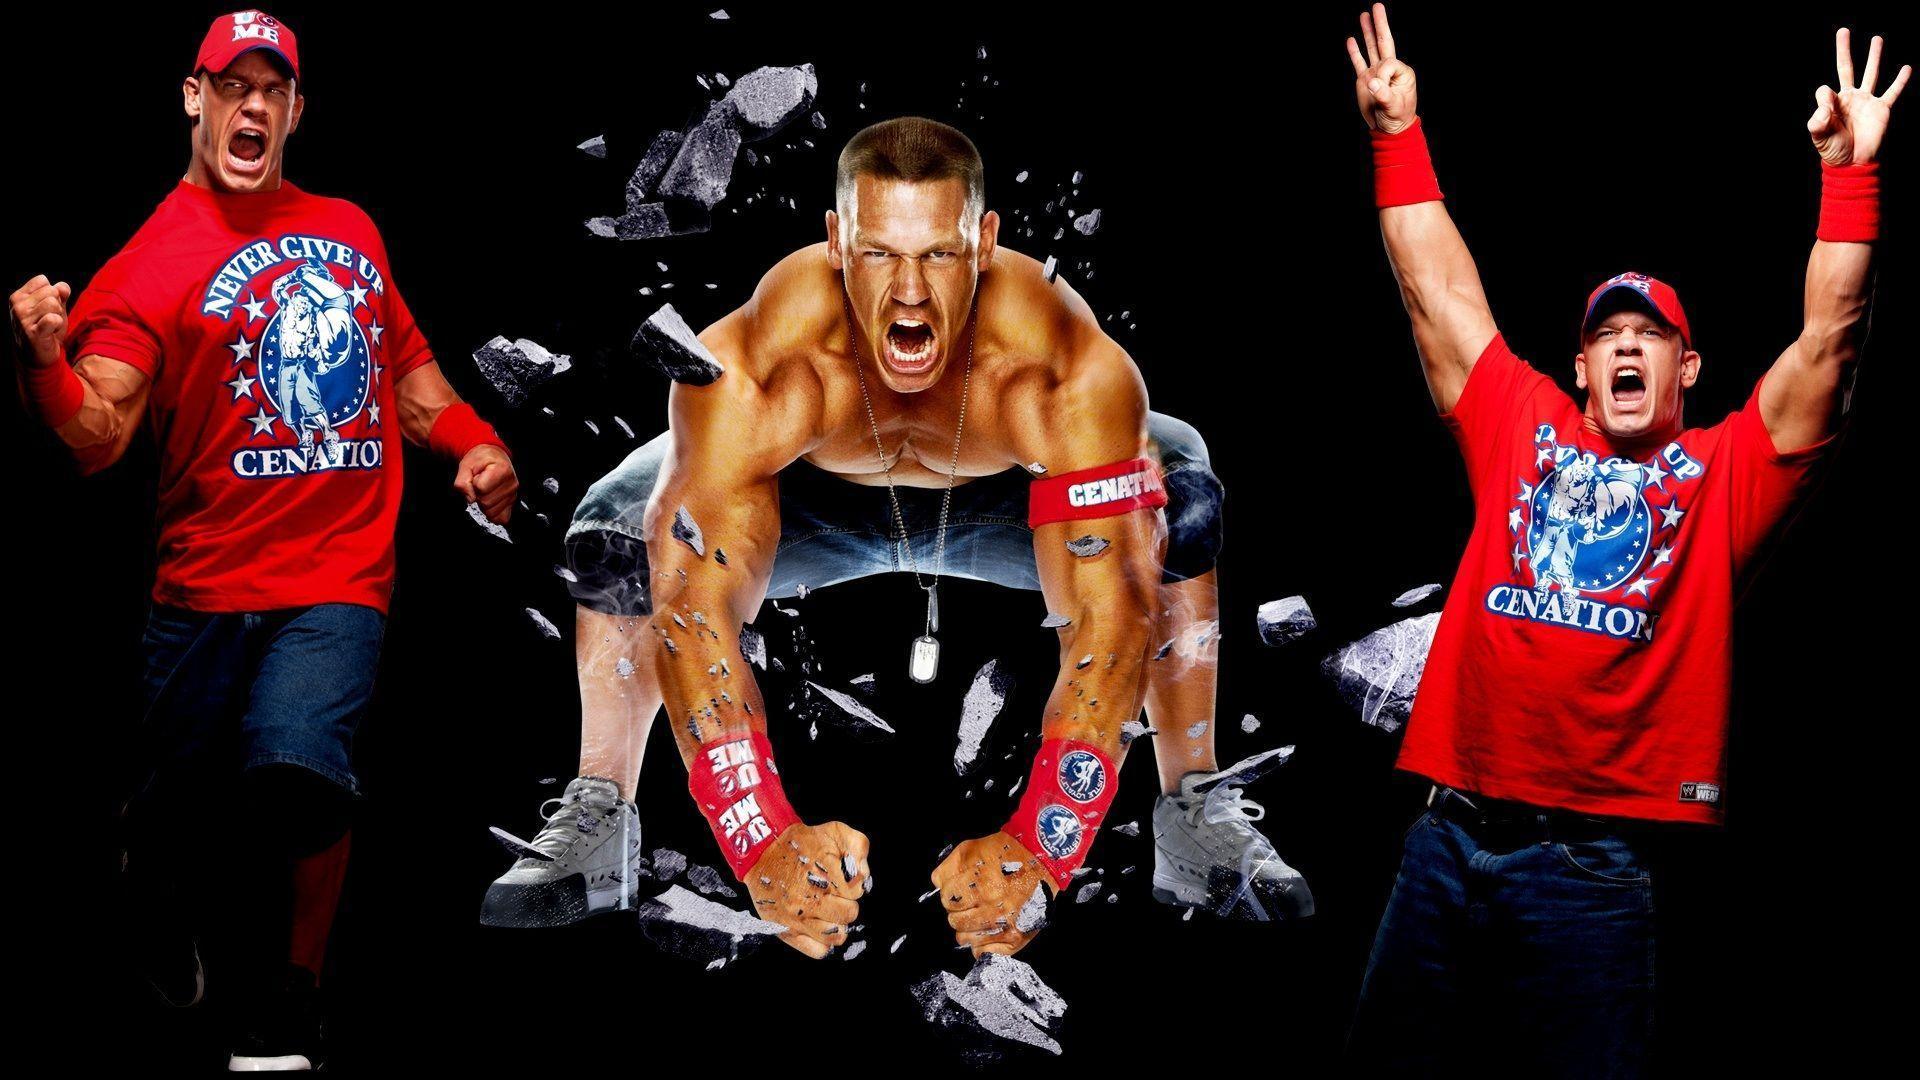 WWE HD Wallpaper for Desktop, iPhone, iPad, and Android